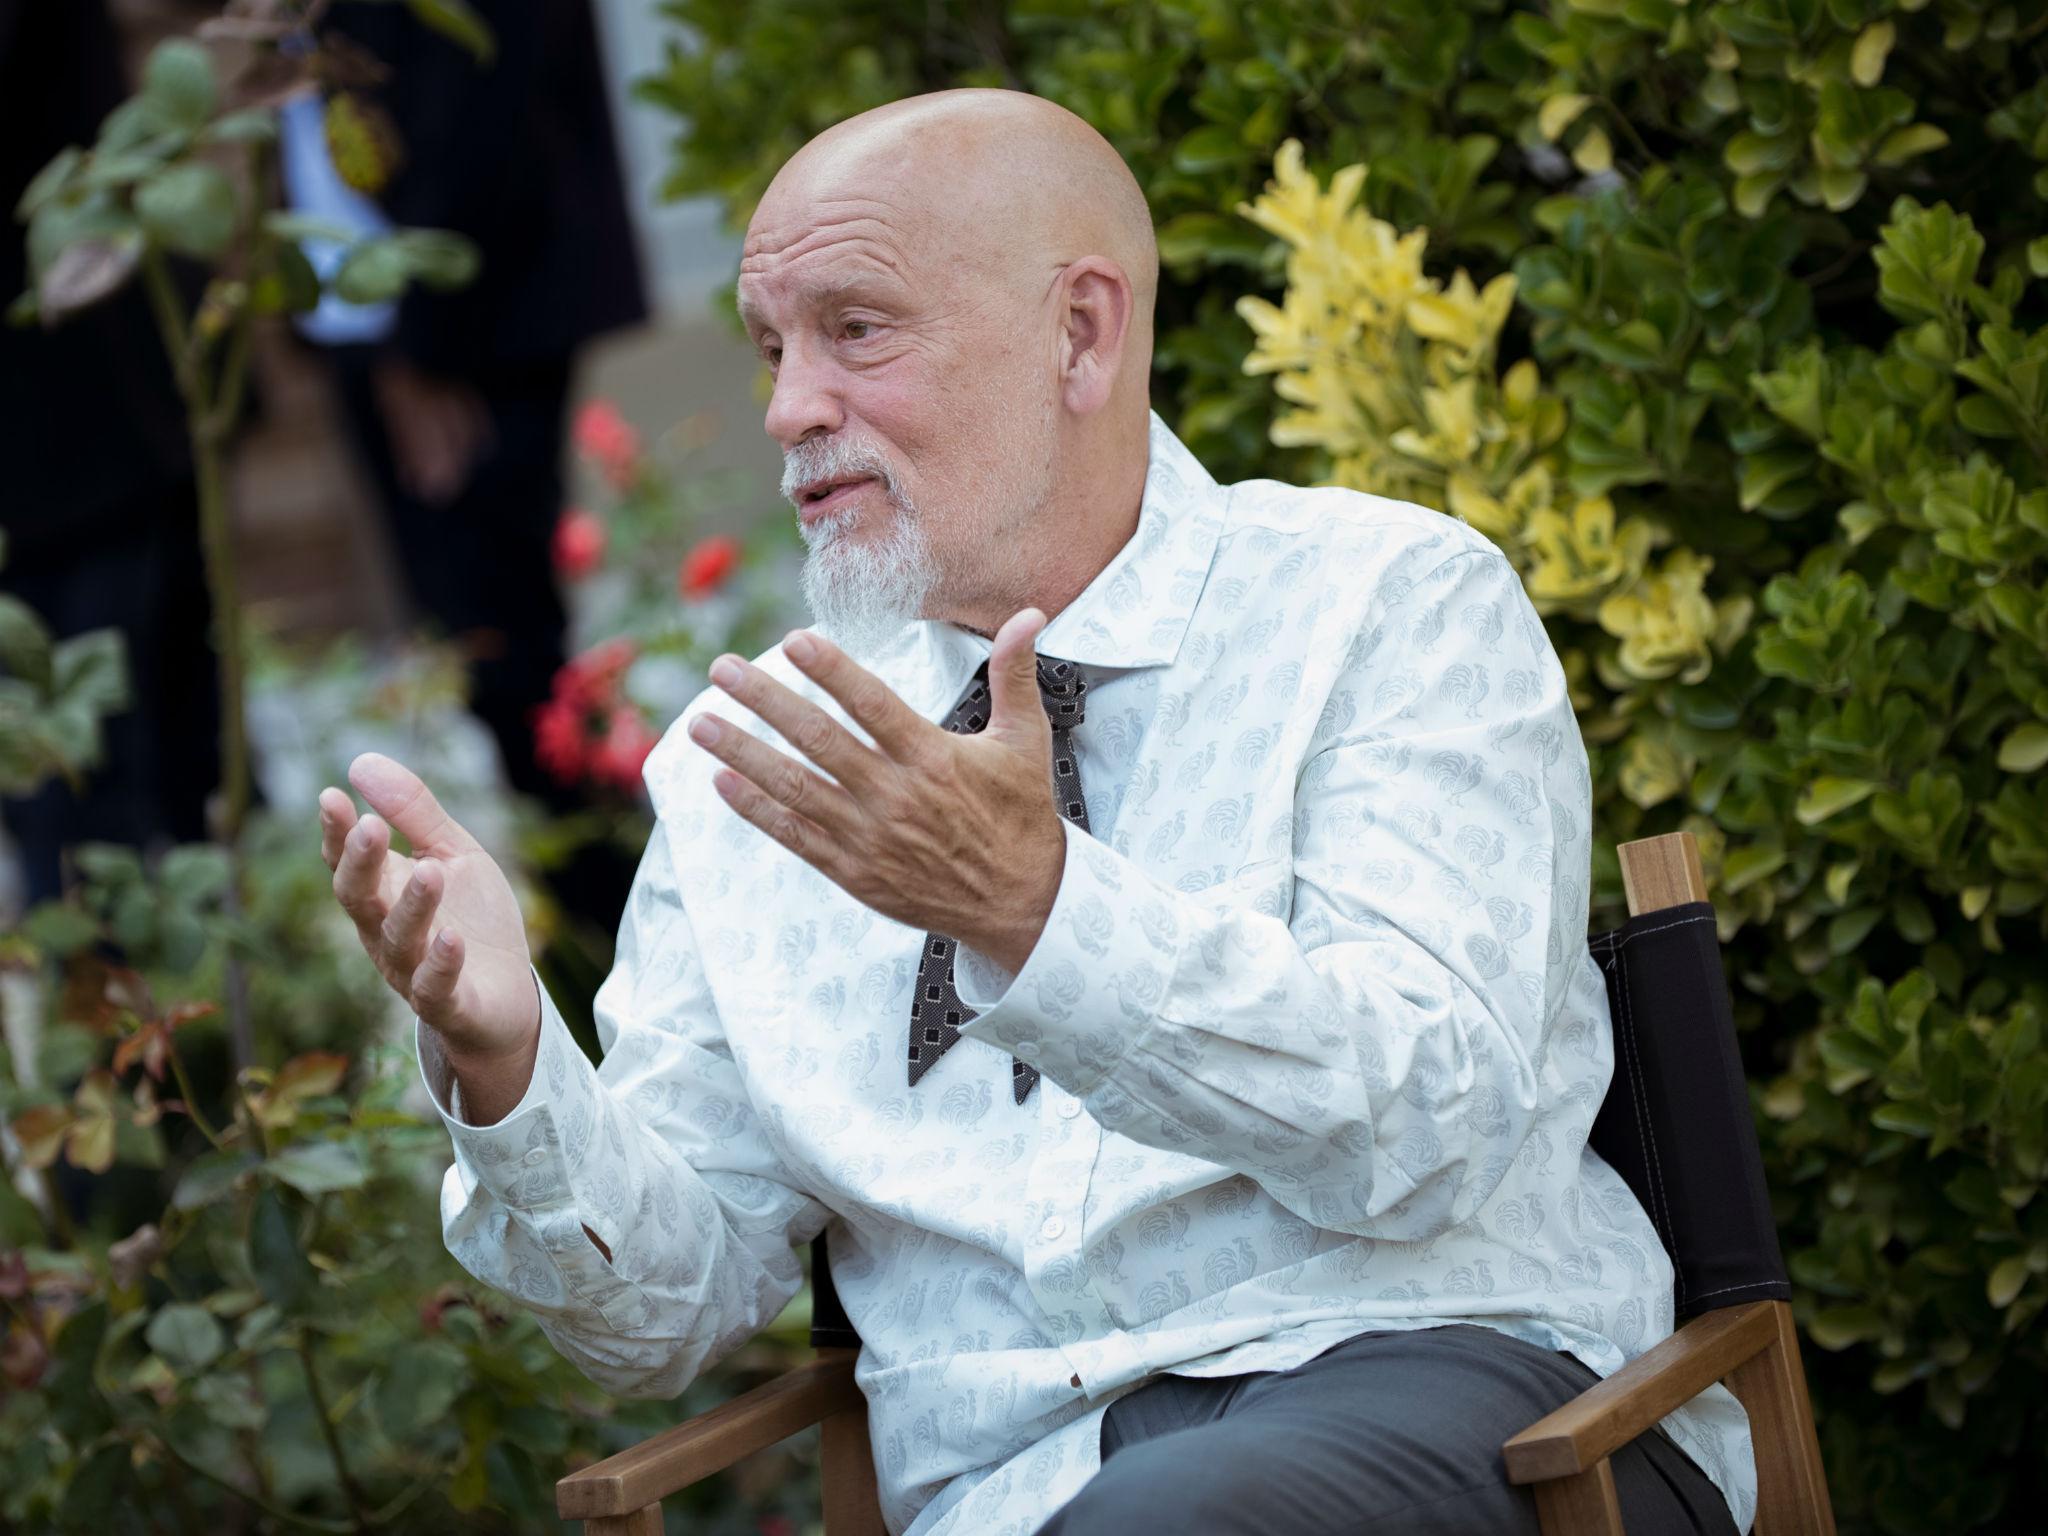 John Malkovich stars in 'The Wilde Wedding' and is currently shooting 'Bird Box' with Sandra Bullock